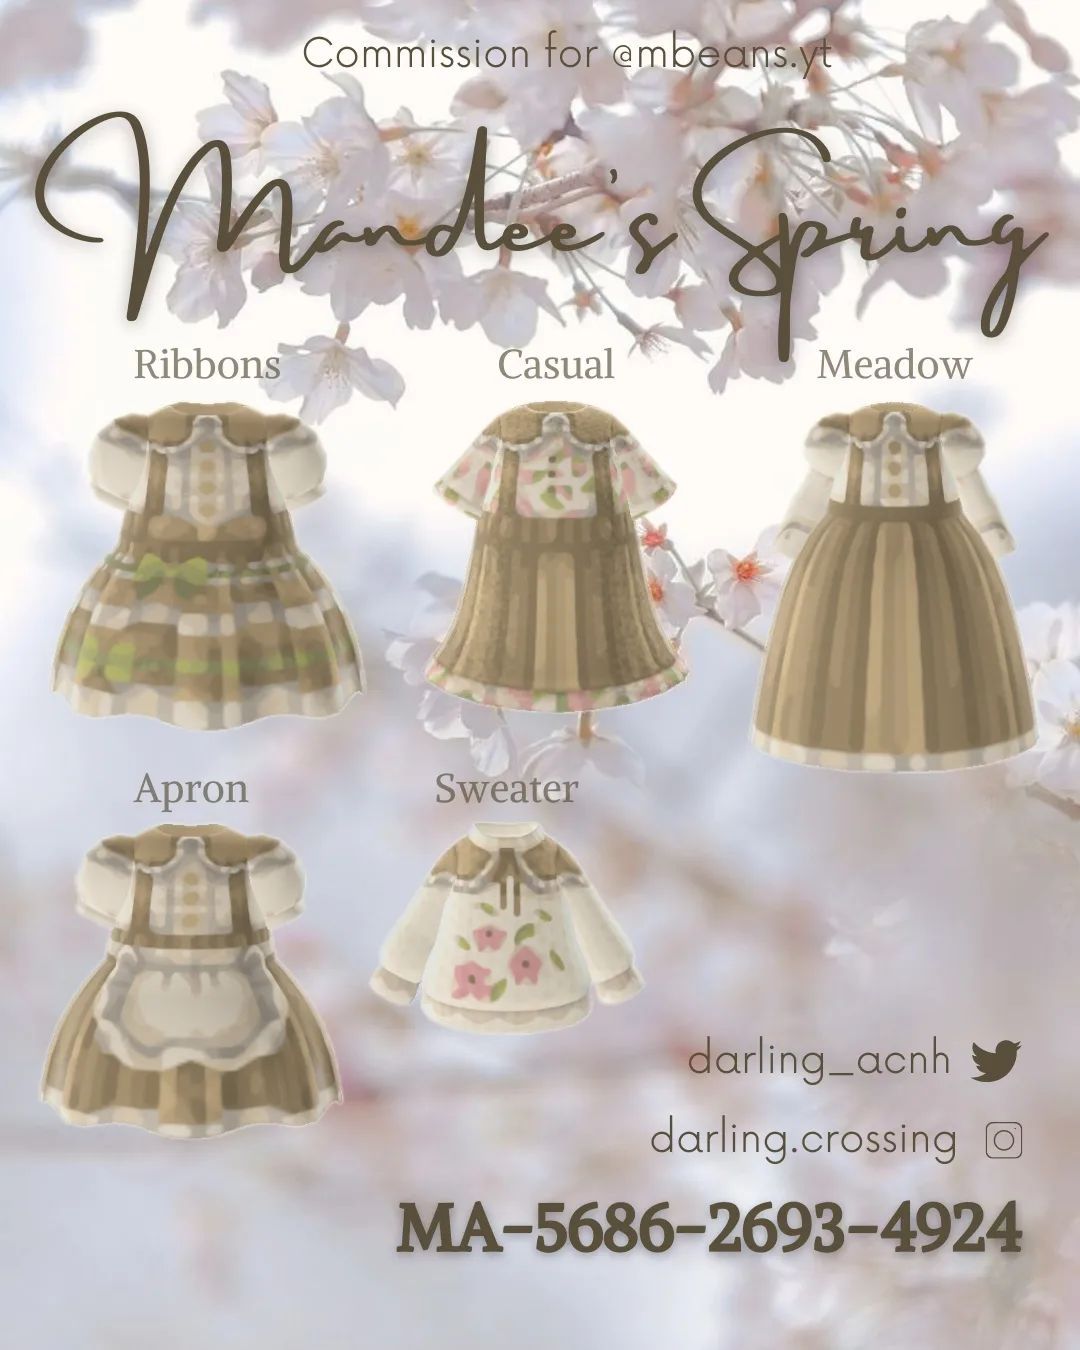 mandee’s spring collection ✿ by darling.crossing on ig